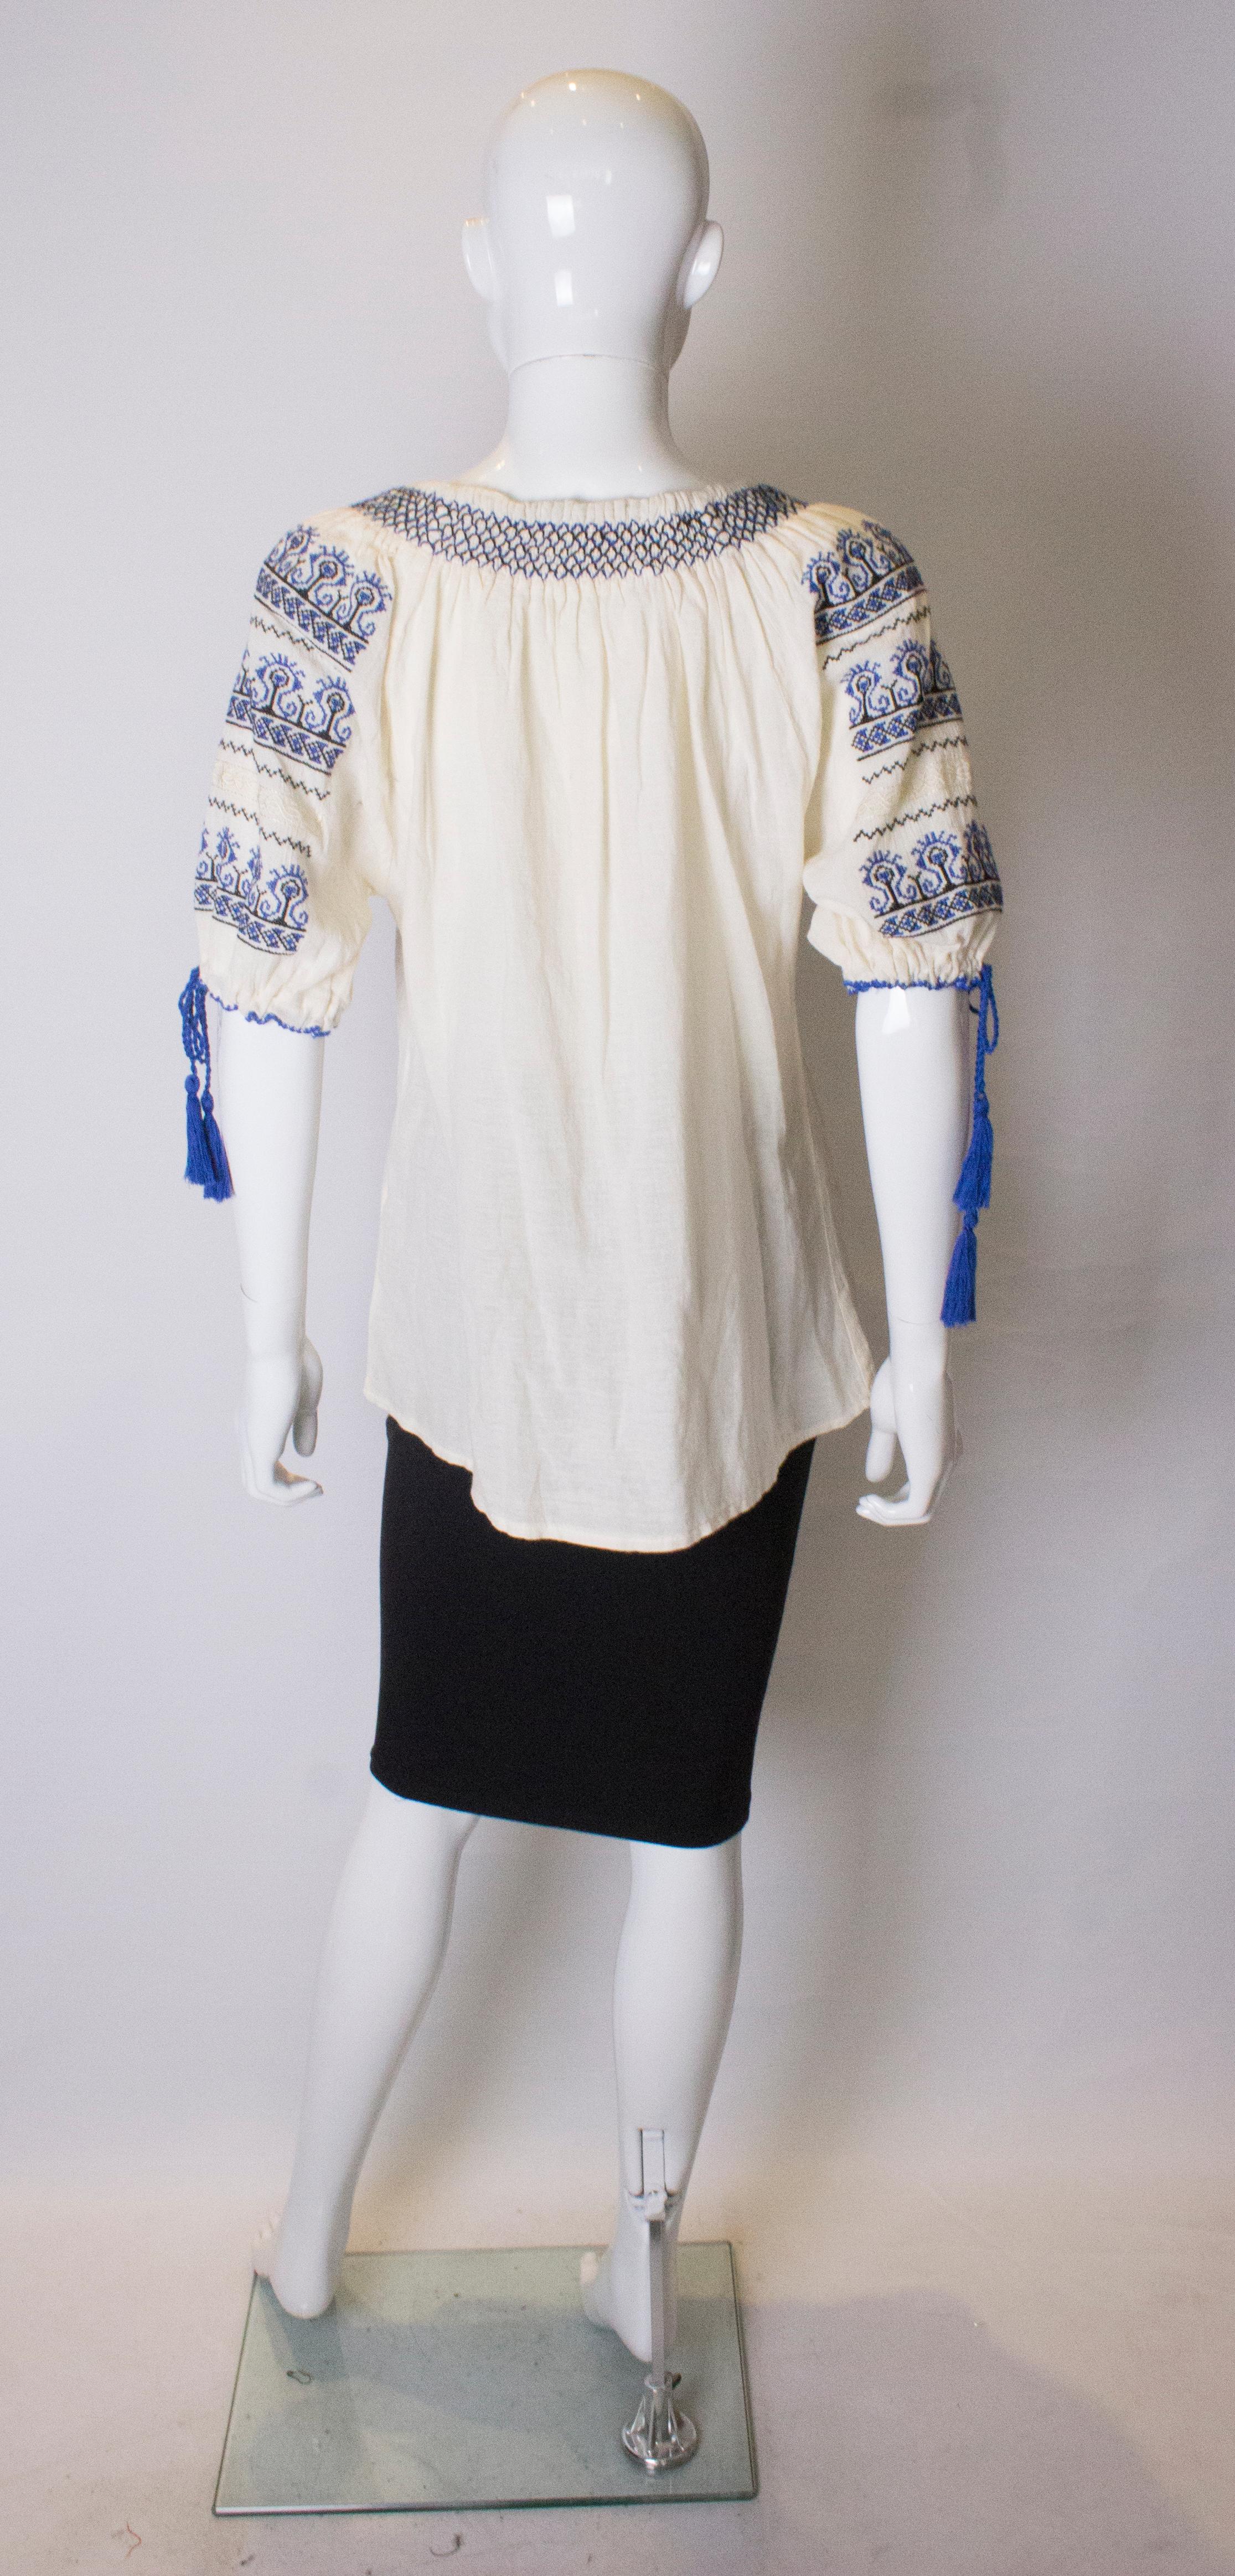 Vintage 1970s Boho Top In Good Condition For Sale In London, GB